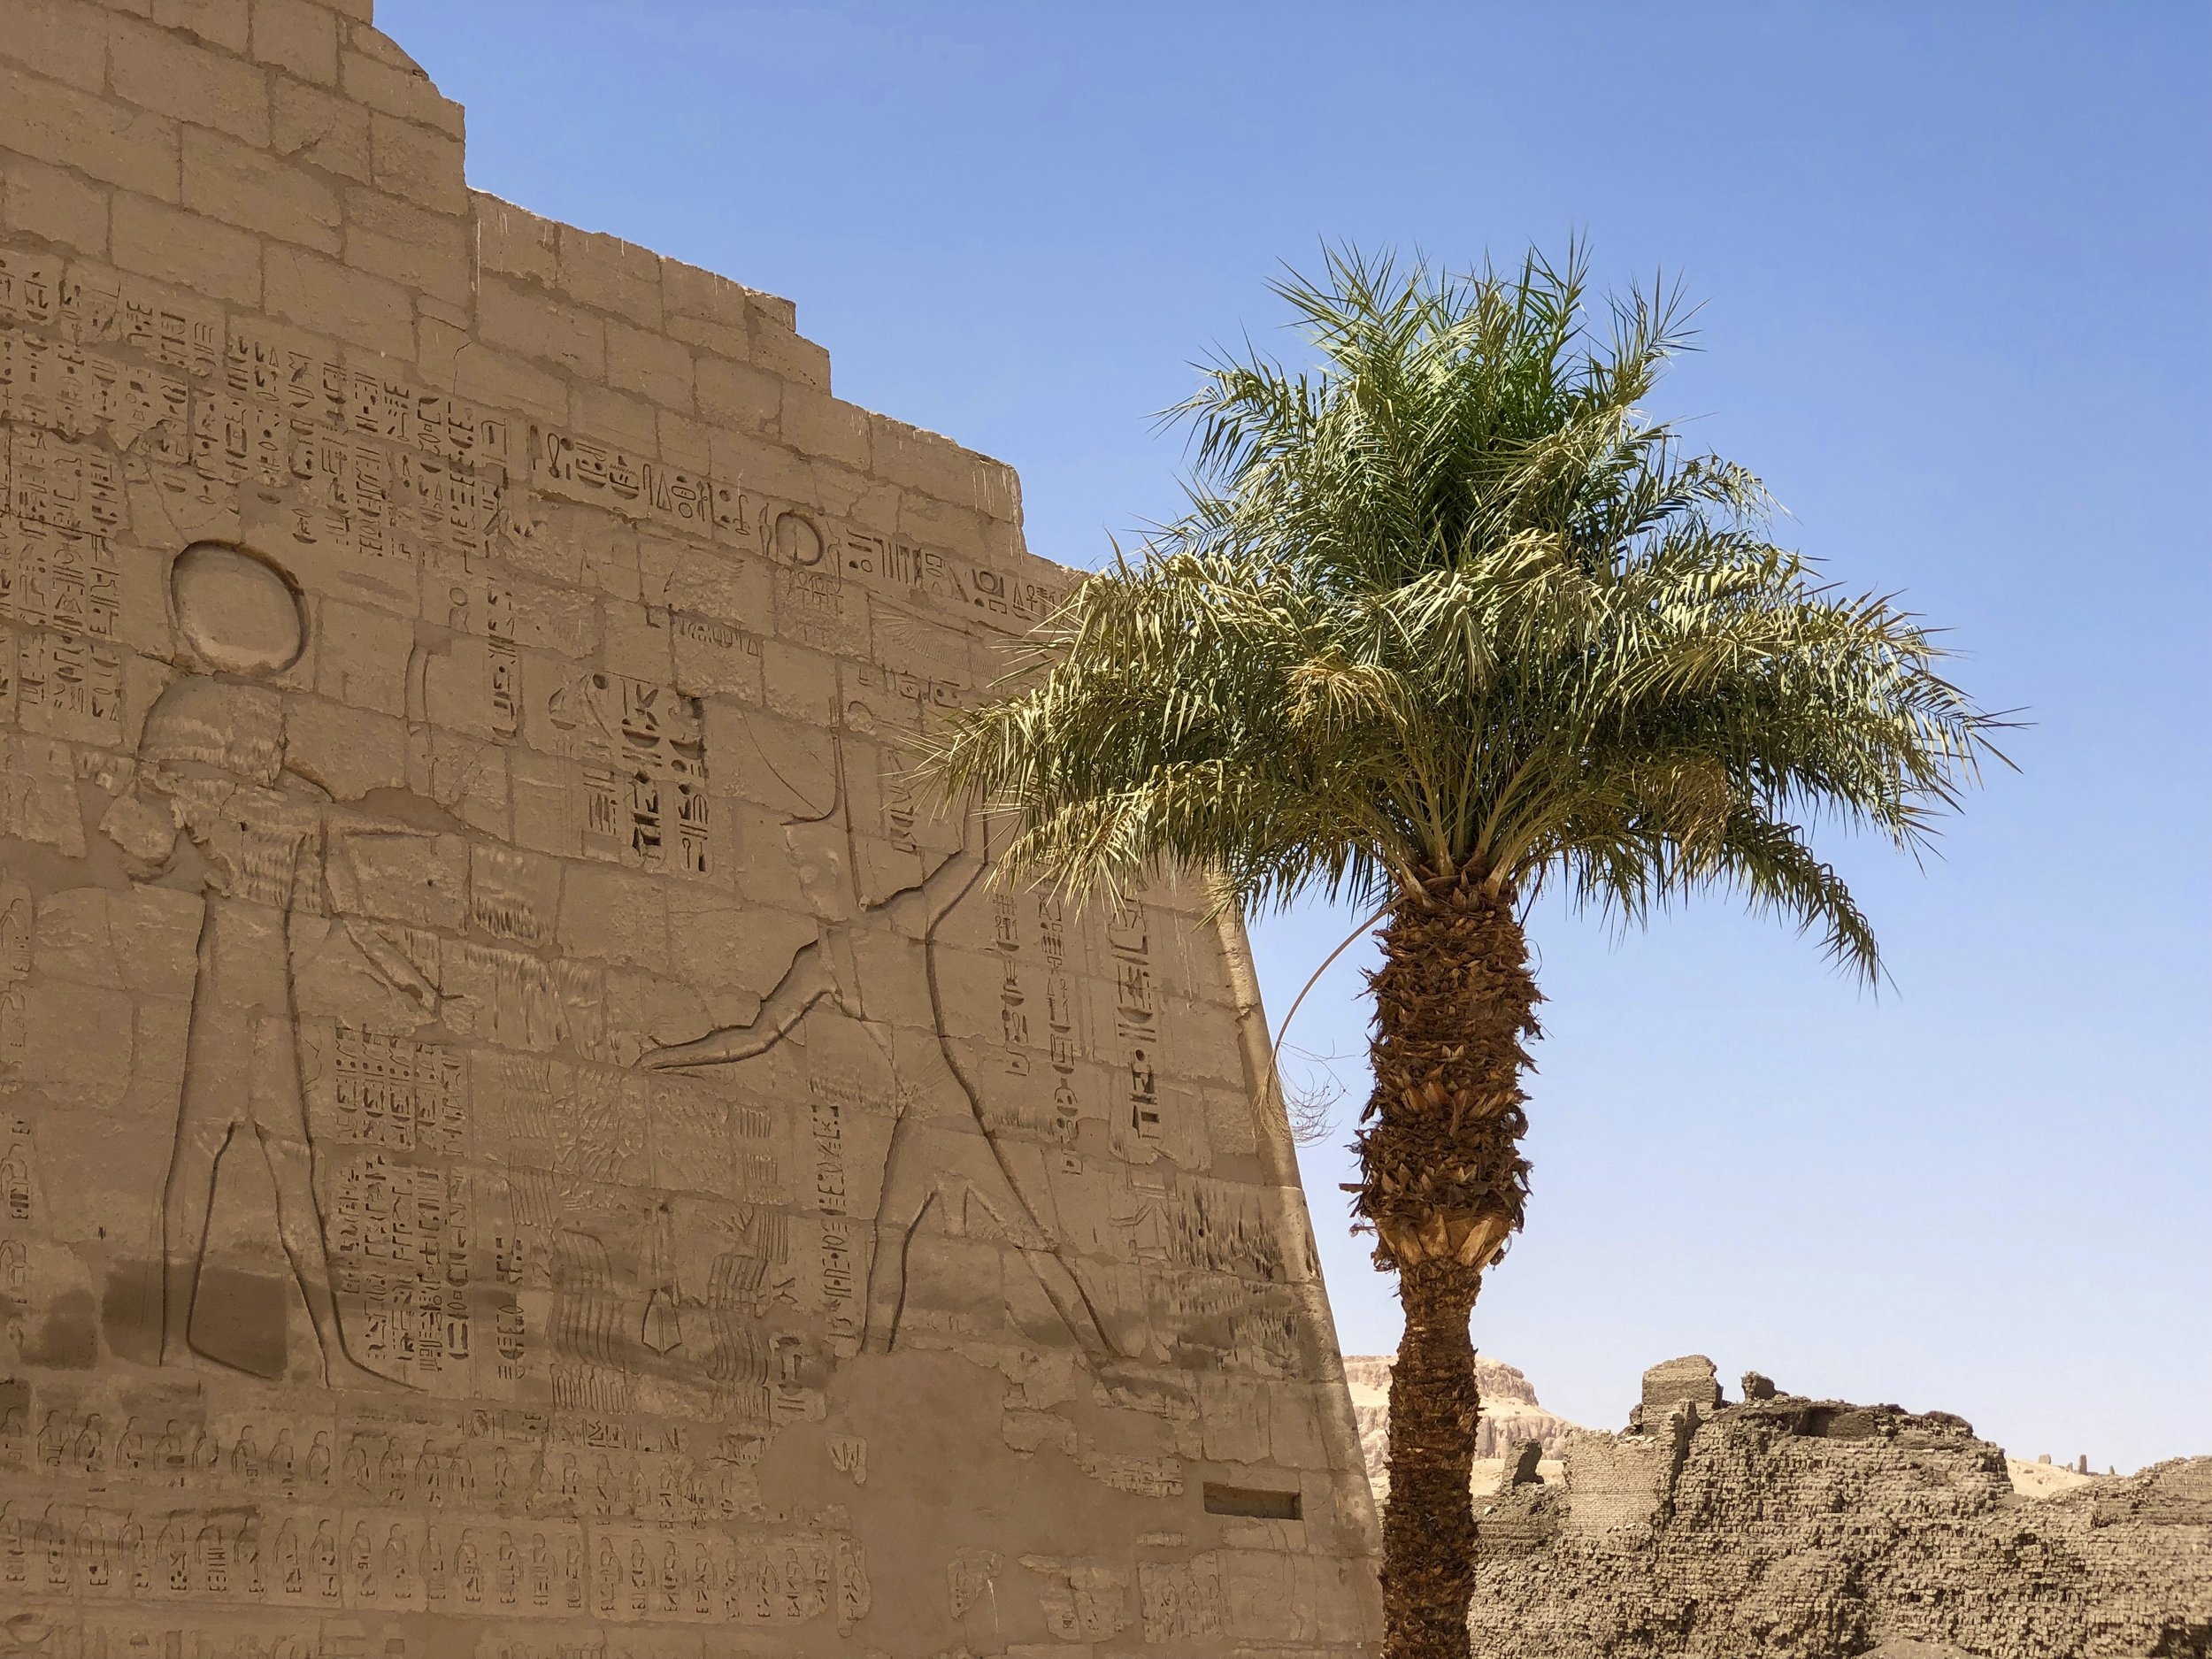 The bas-reliefs on the pylon gateways depict Ramesses III’s victory over the fierce Sea Peoples